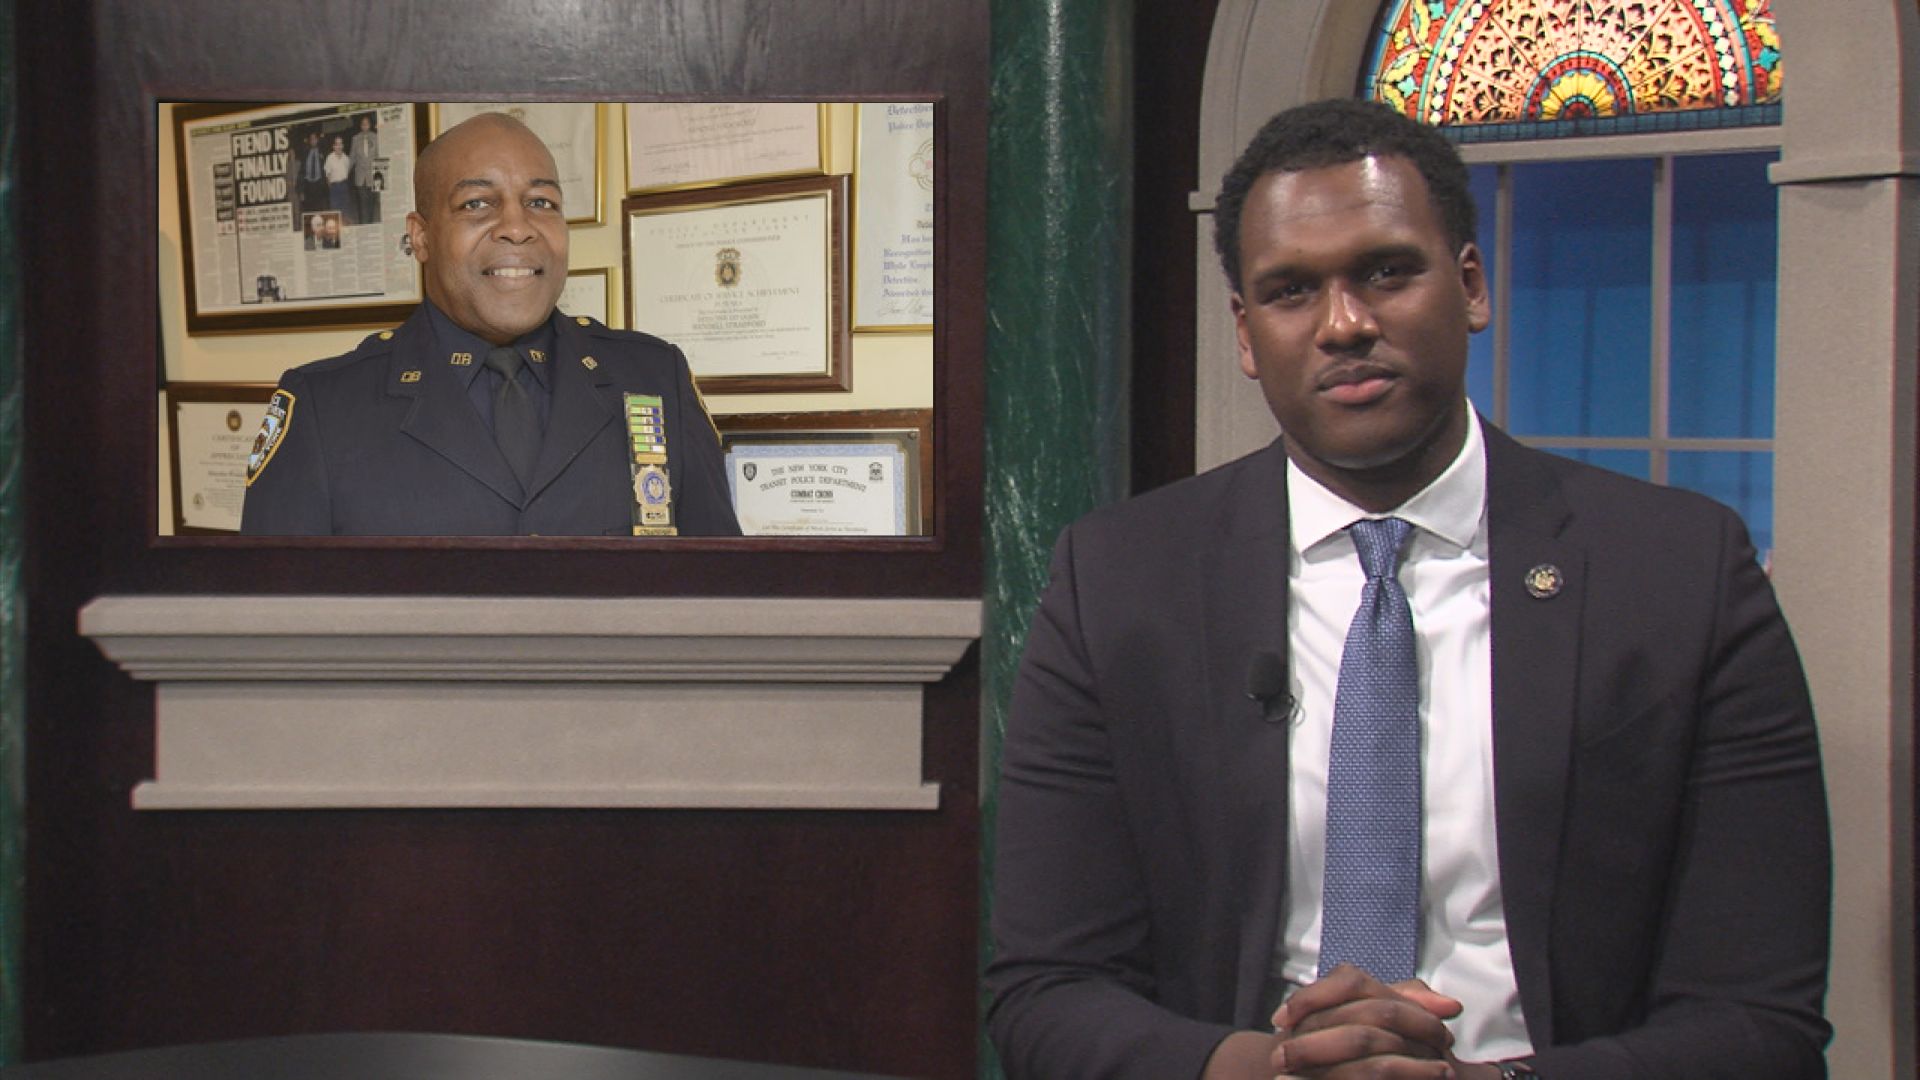 Highlighting the Career of Decorated NYPD Detective Wendell Stradford